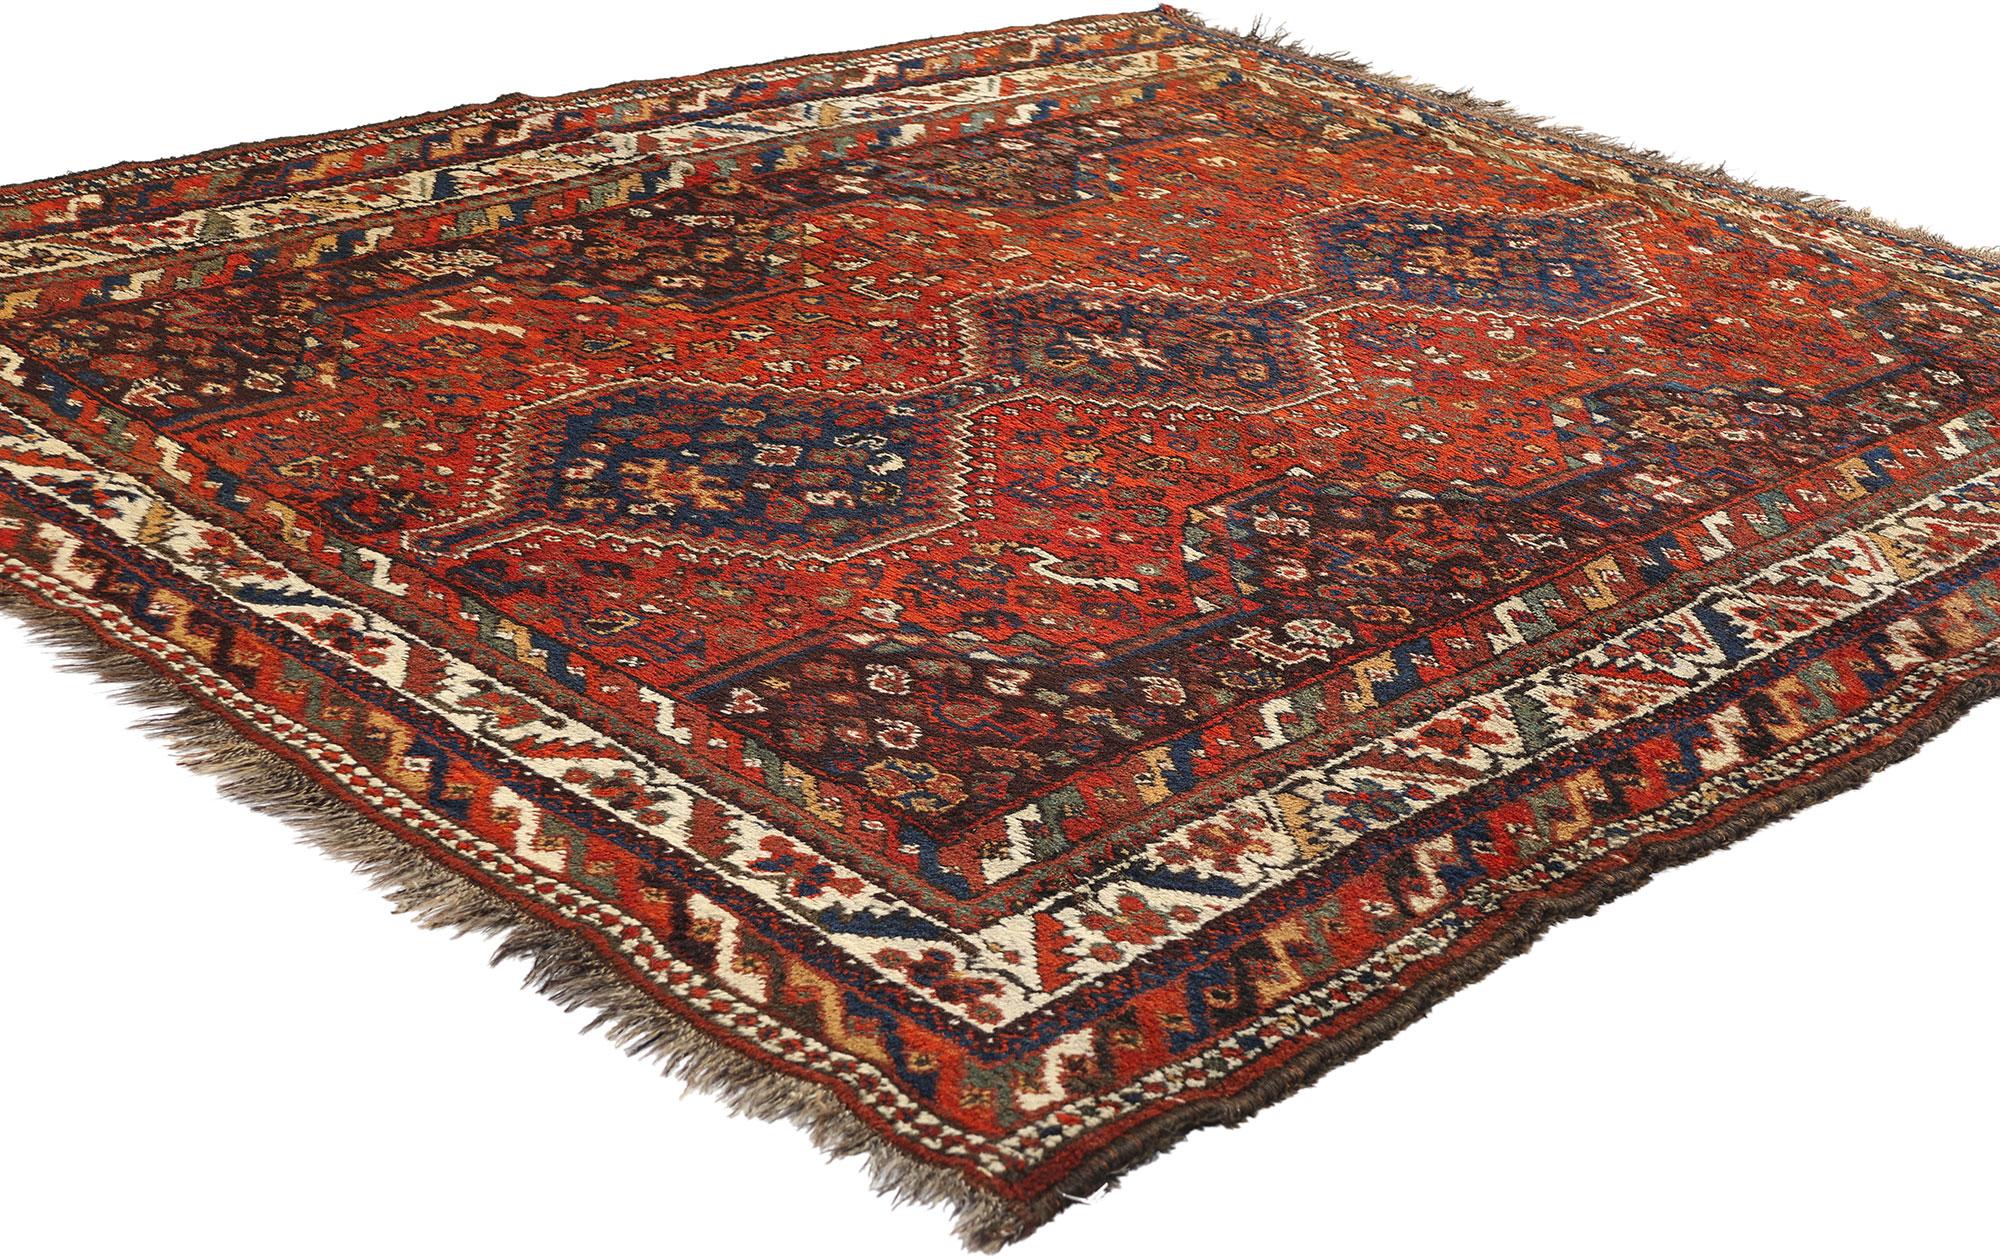 78155 Antique Persian Shiraz Rug, 05'06 x 06'05. ​Persian Shiraz rugs, hailing from the villages surrounding the historic city of Shiraz in Iran's Fars province, epitomize the essence of tribal artistry and rustic allure. Crafted by adept artisans